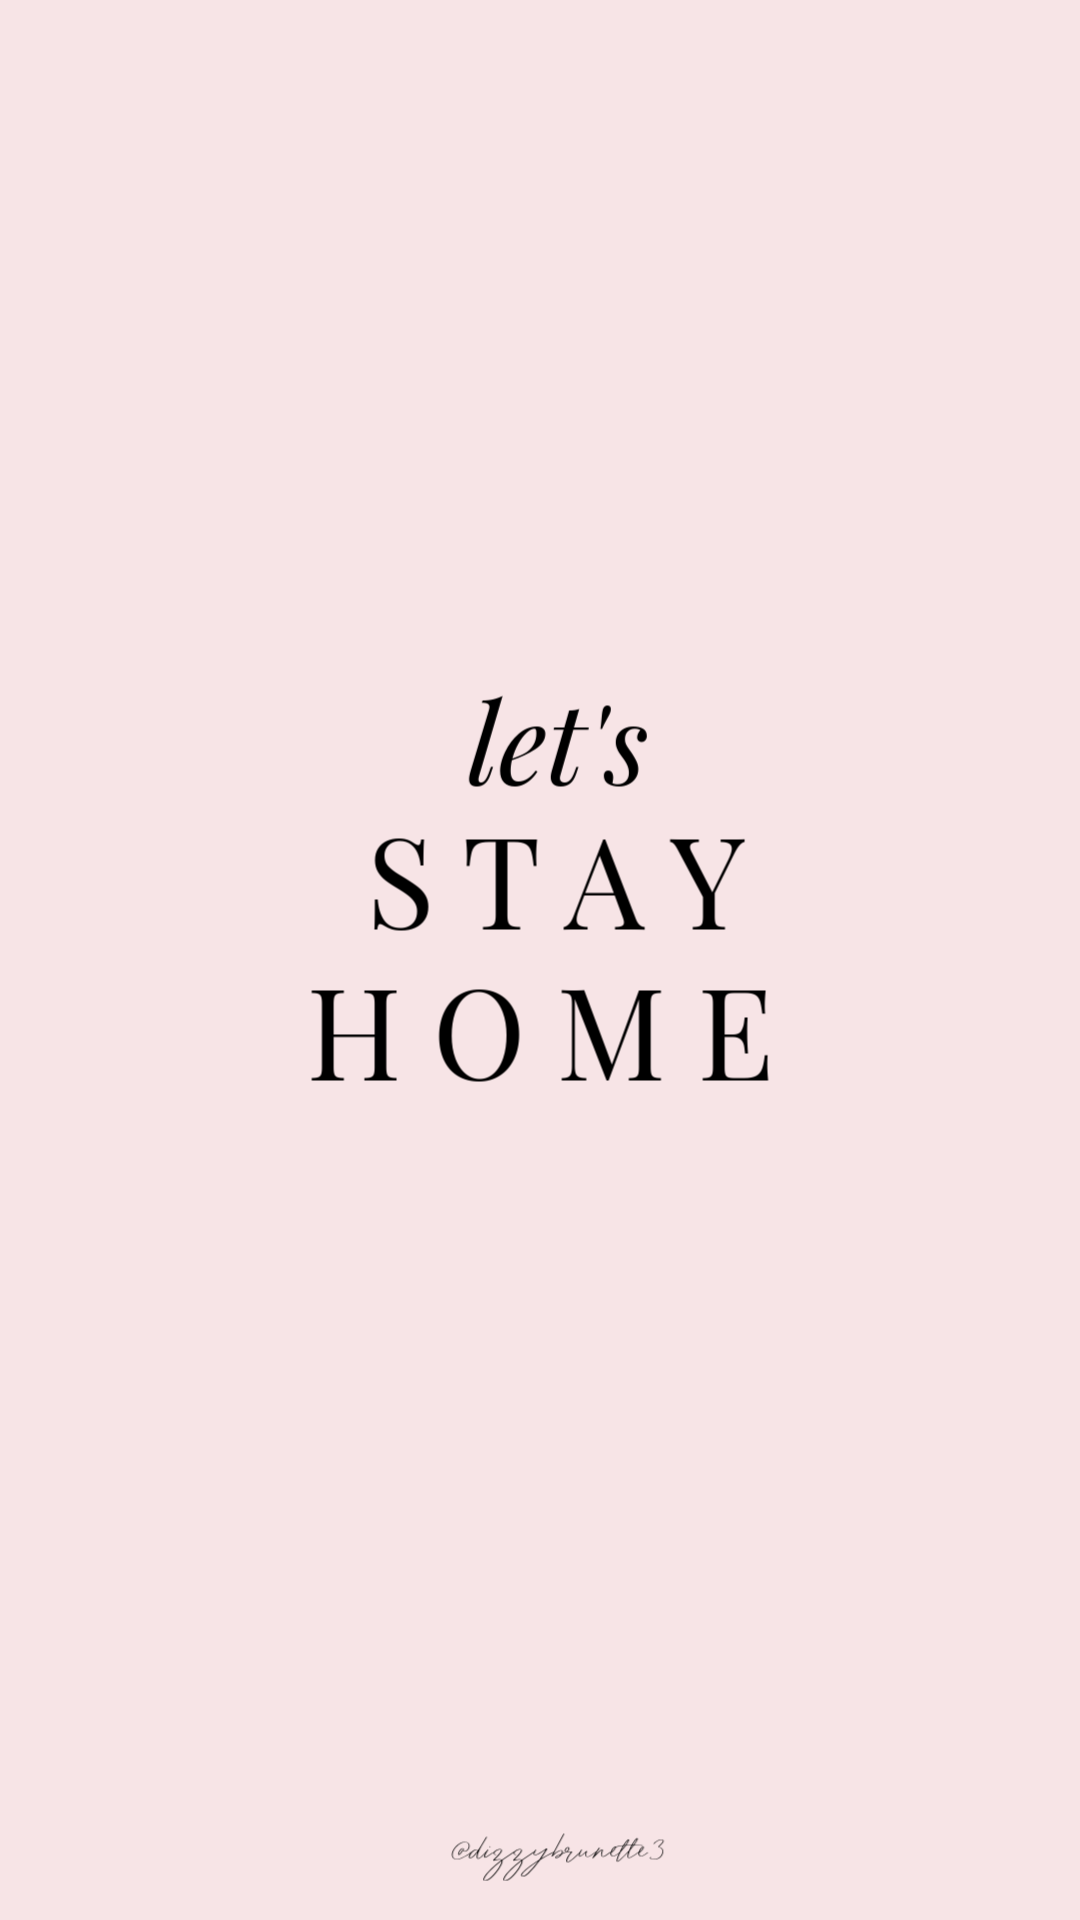 Stay Home Wallpaper Free Stay Home Background